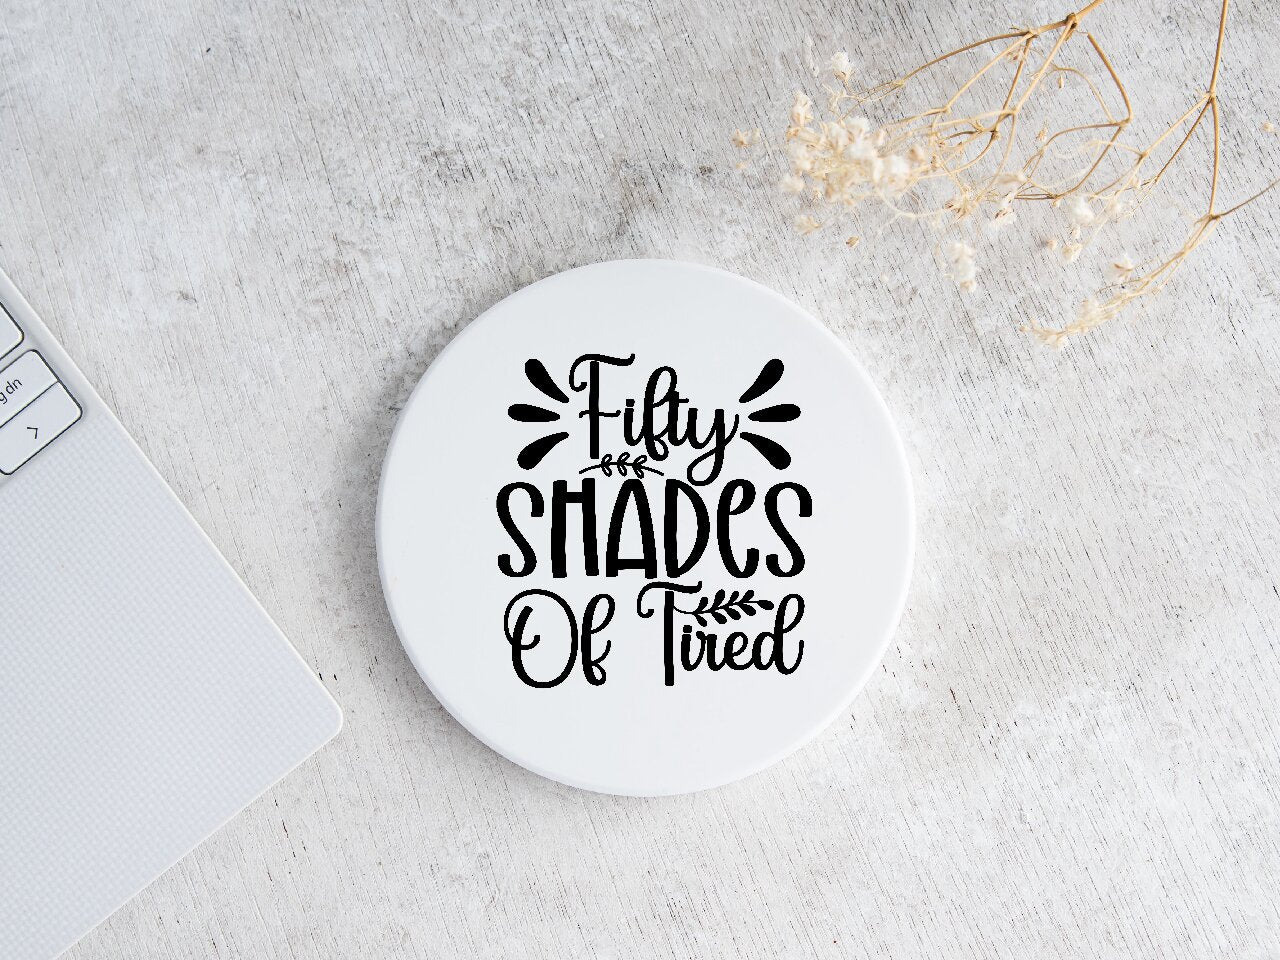 Fifty Shades of Tired - Coaster